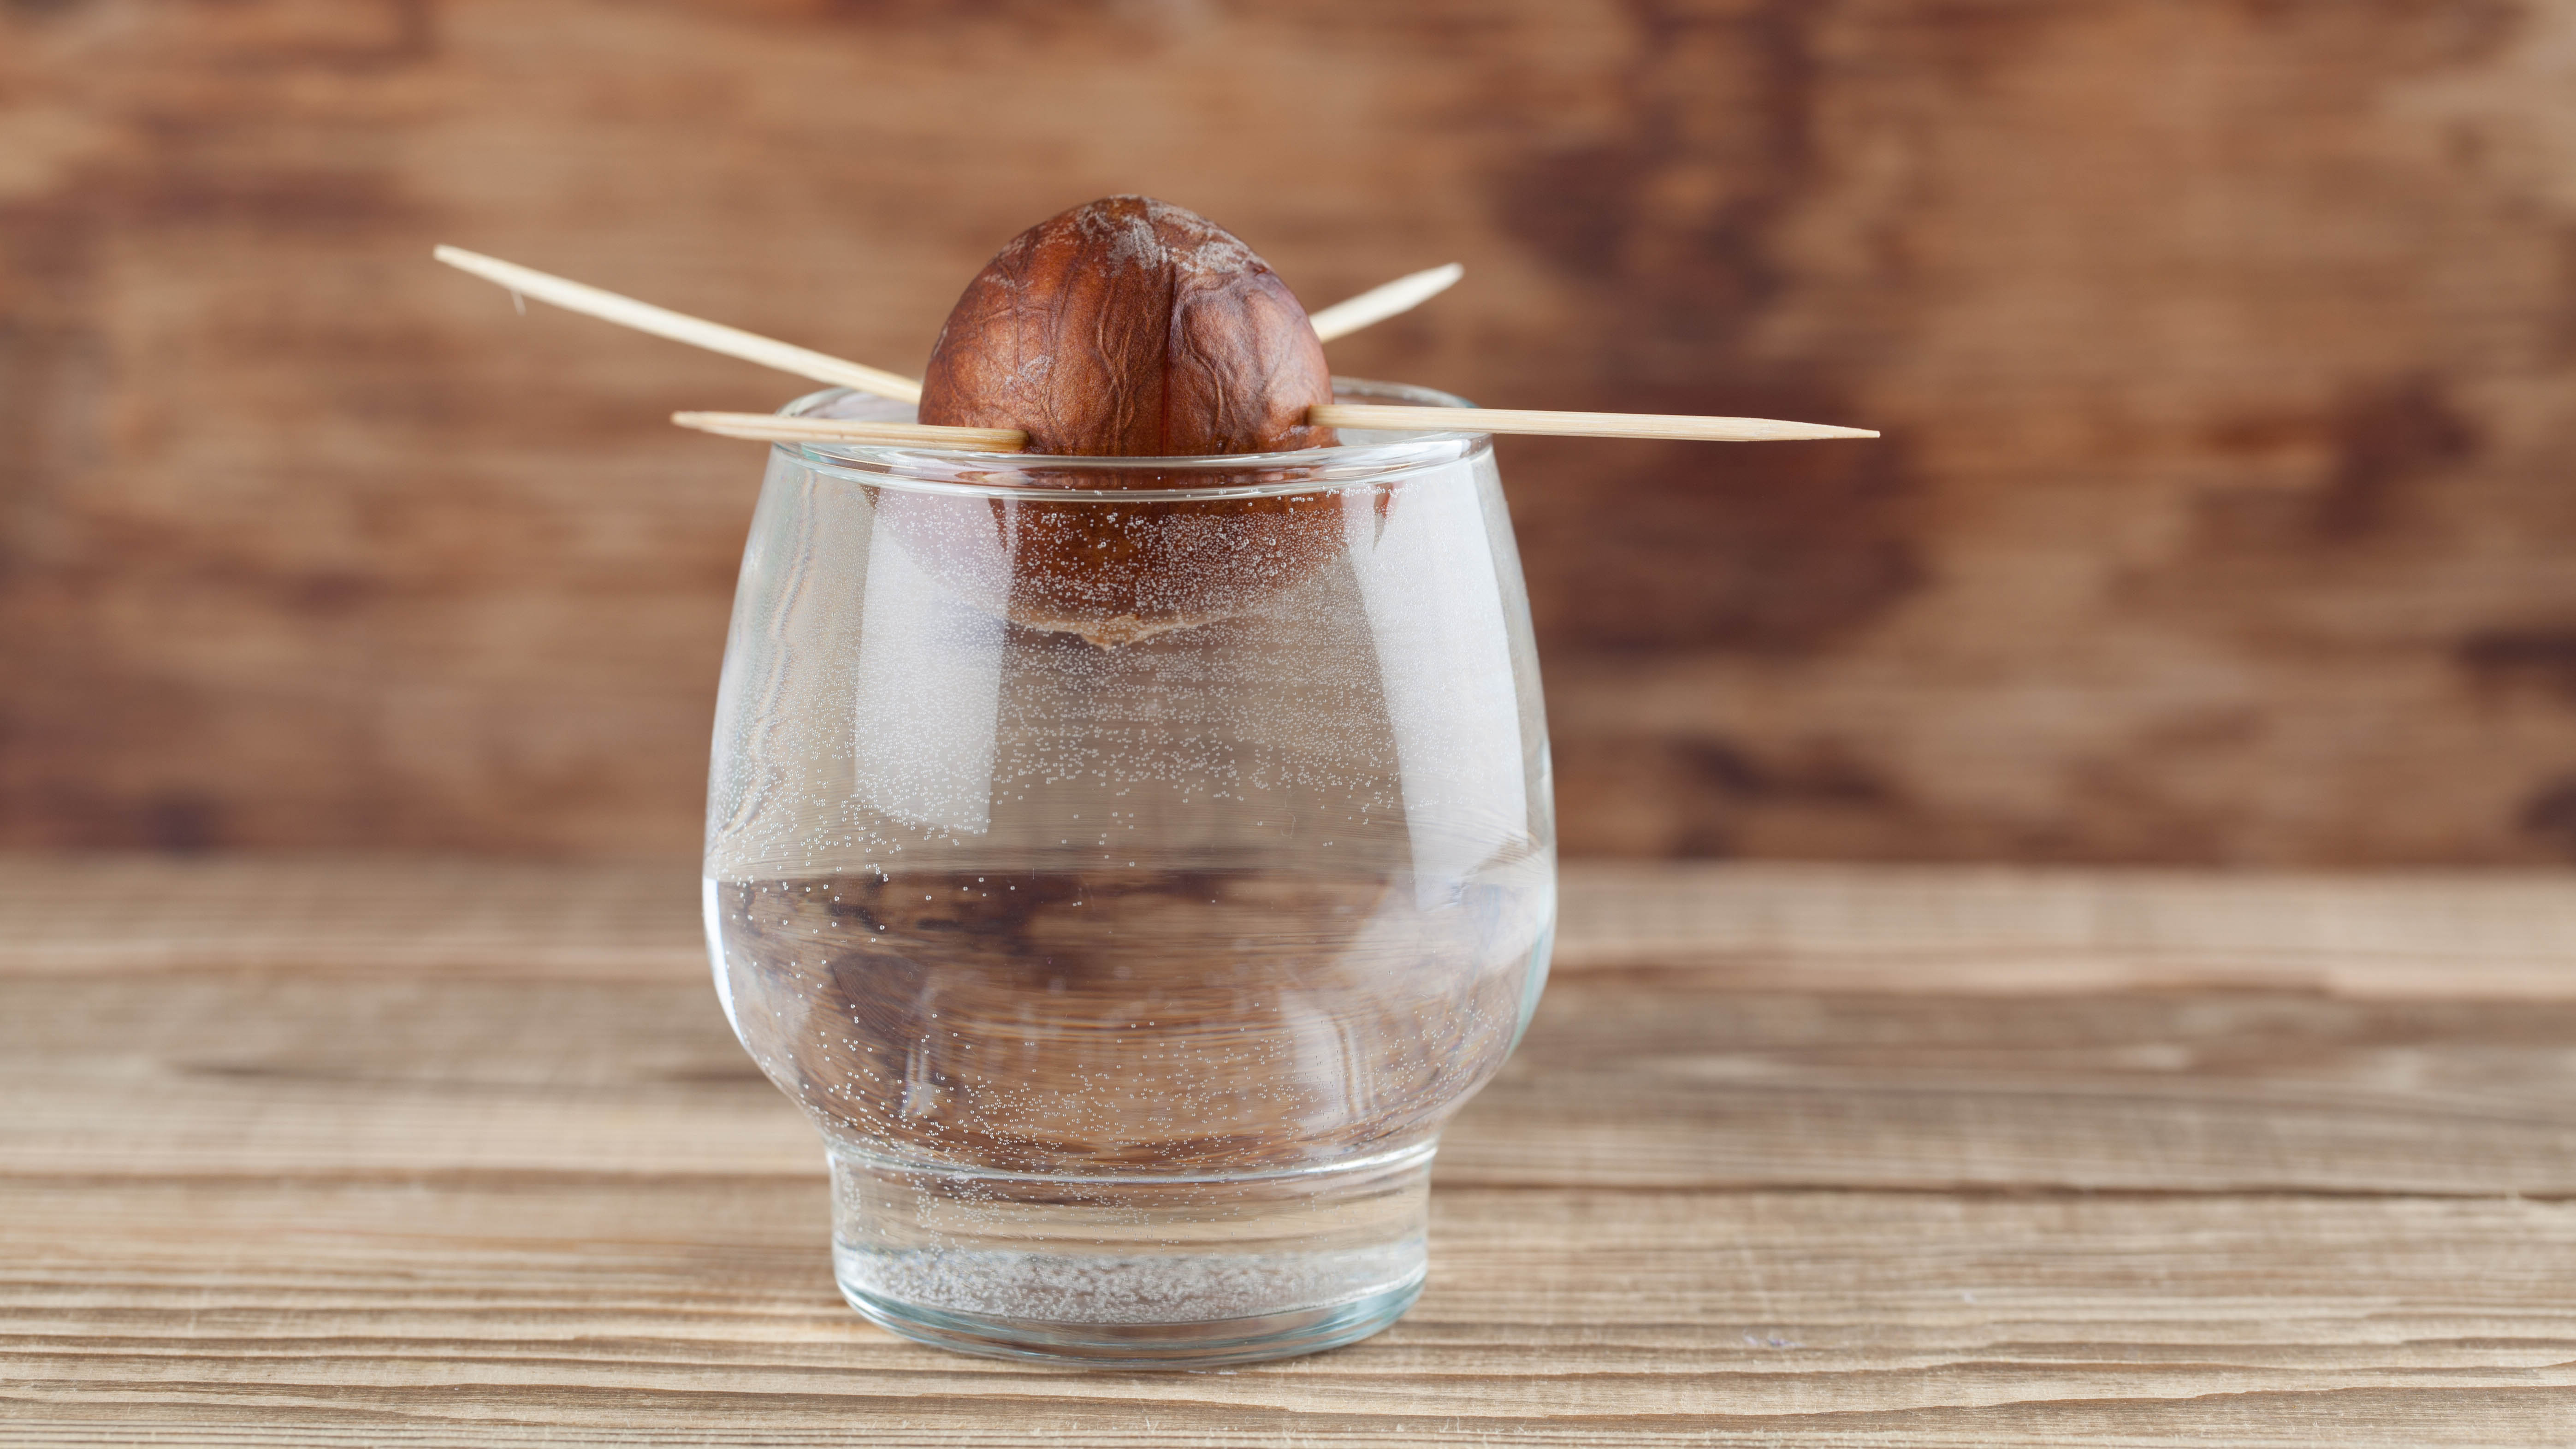 An avocado seed which has been pierced with toothpicks and is suspended over a glass of water